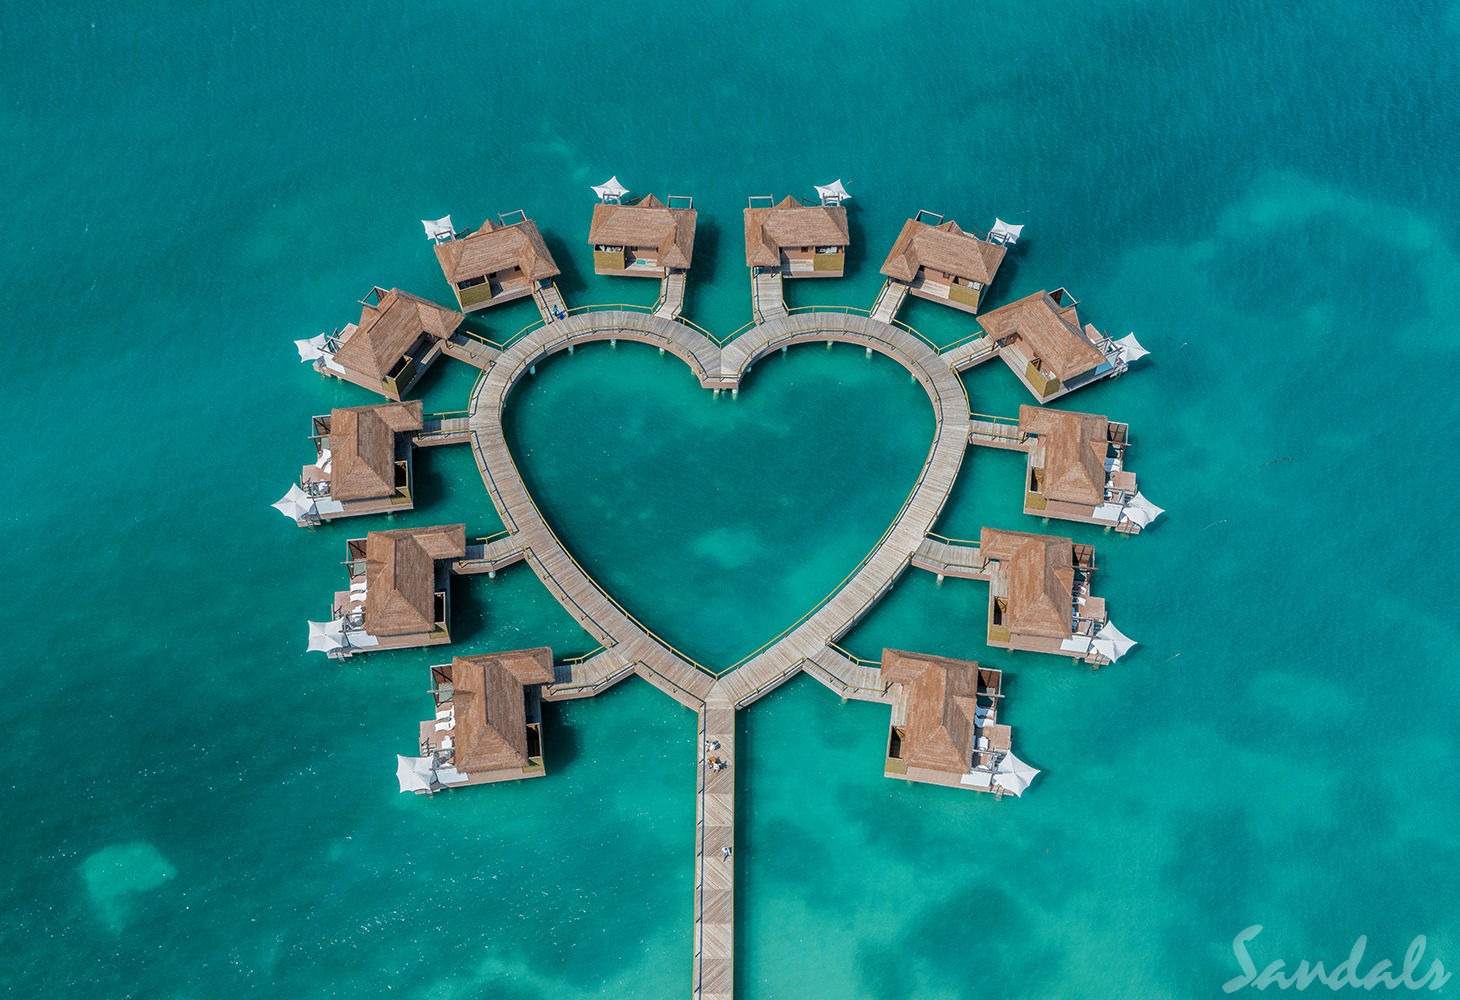 Sandals South Coast Whitehouse Jamaica overwater bungalows luxury resort in the Caribbean